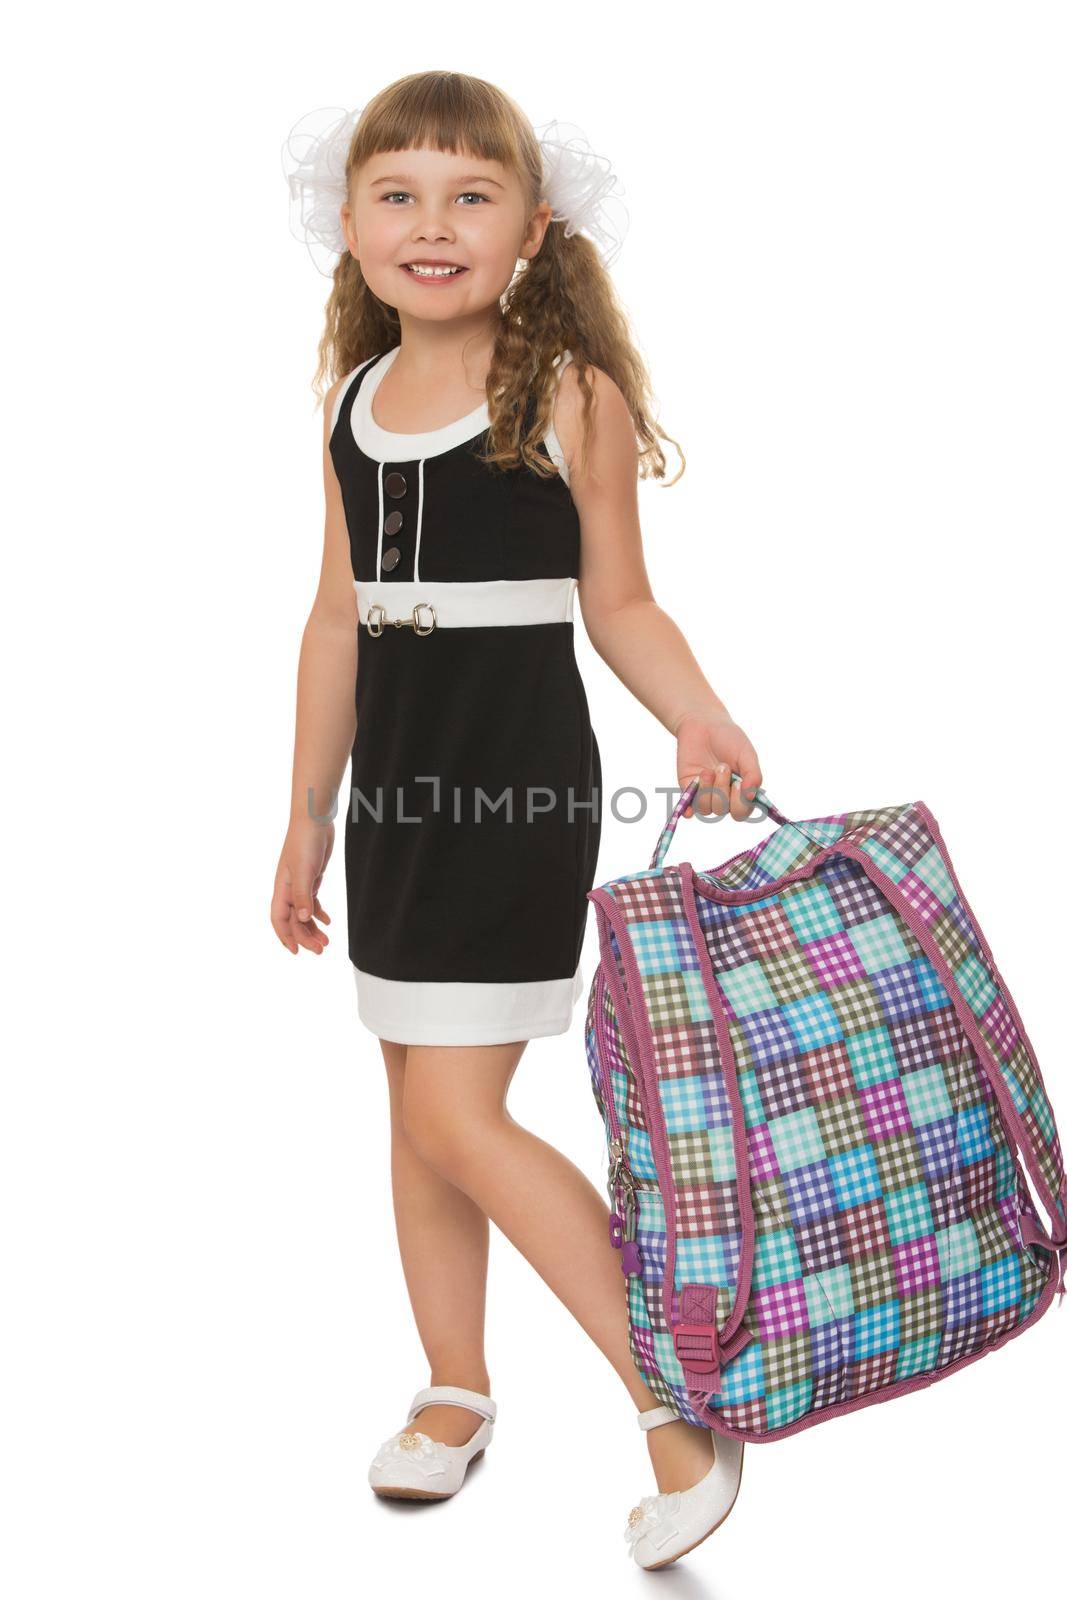 Laughing girl in the black school dress . The girl carries a satchel- Isolated on white background